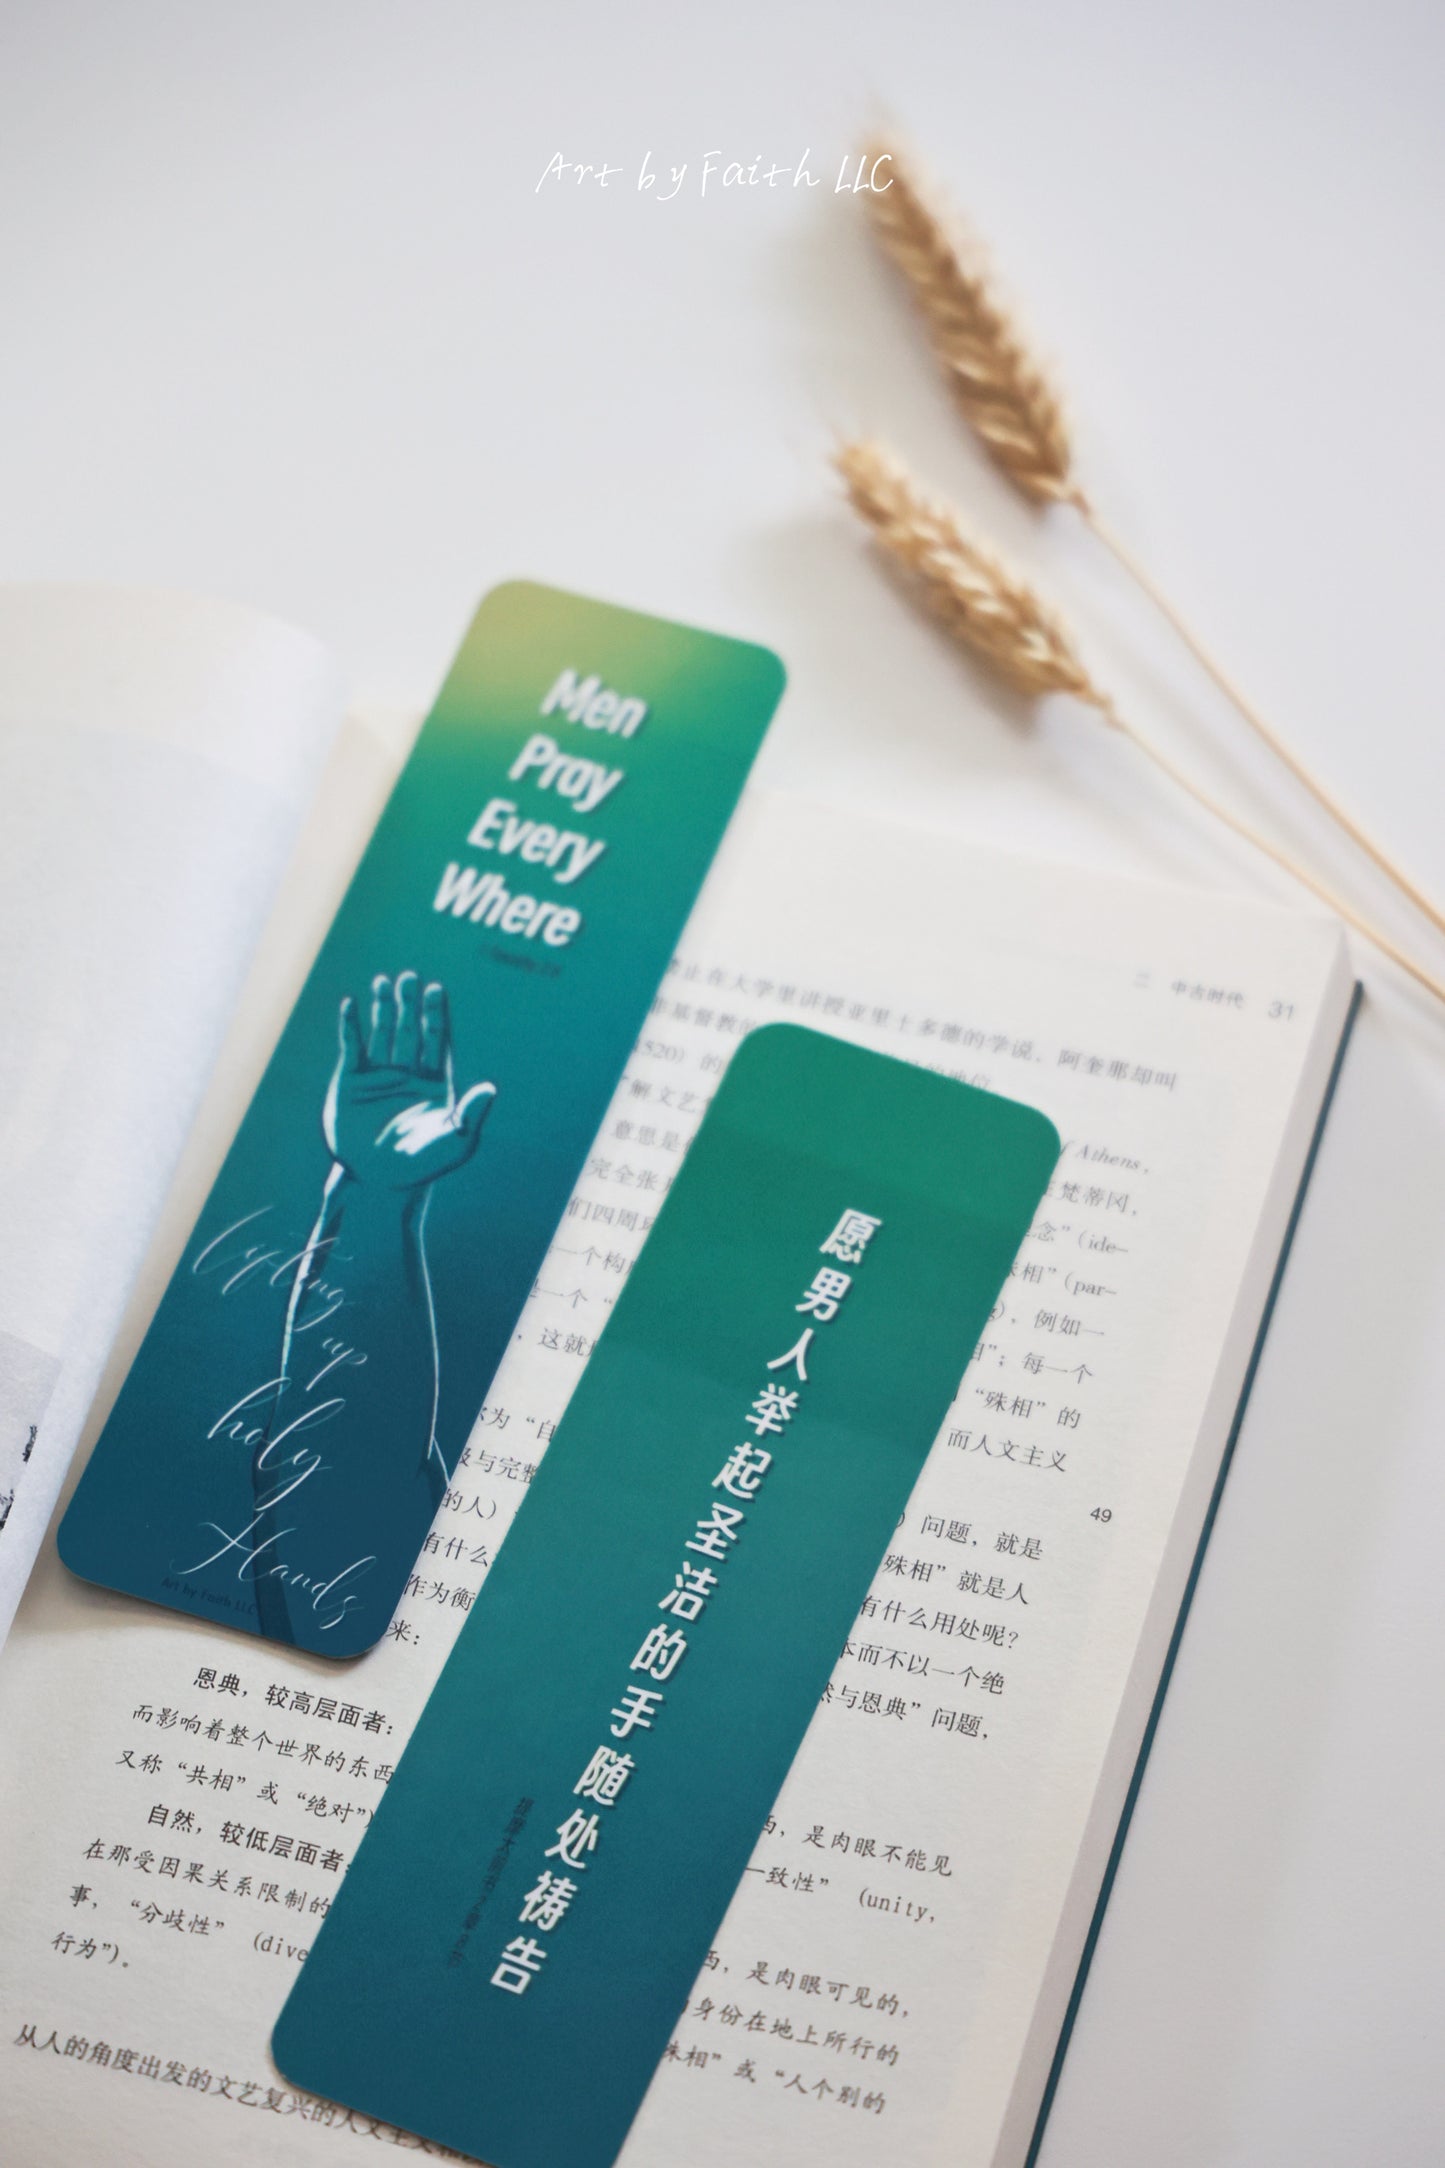 Bookmark "Lift your Holy Hands"